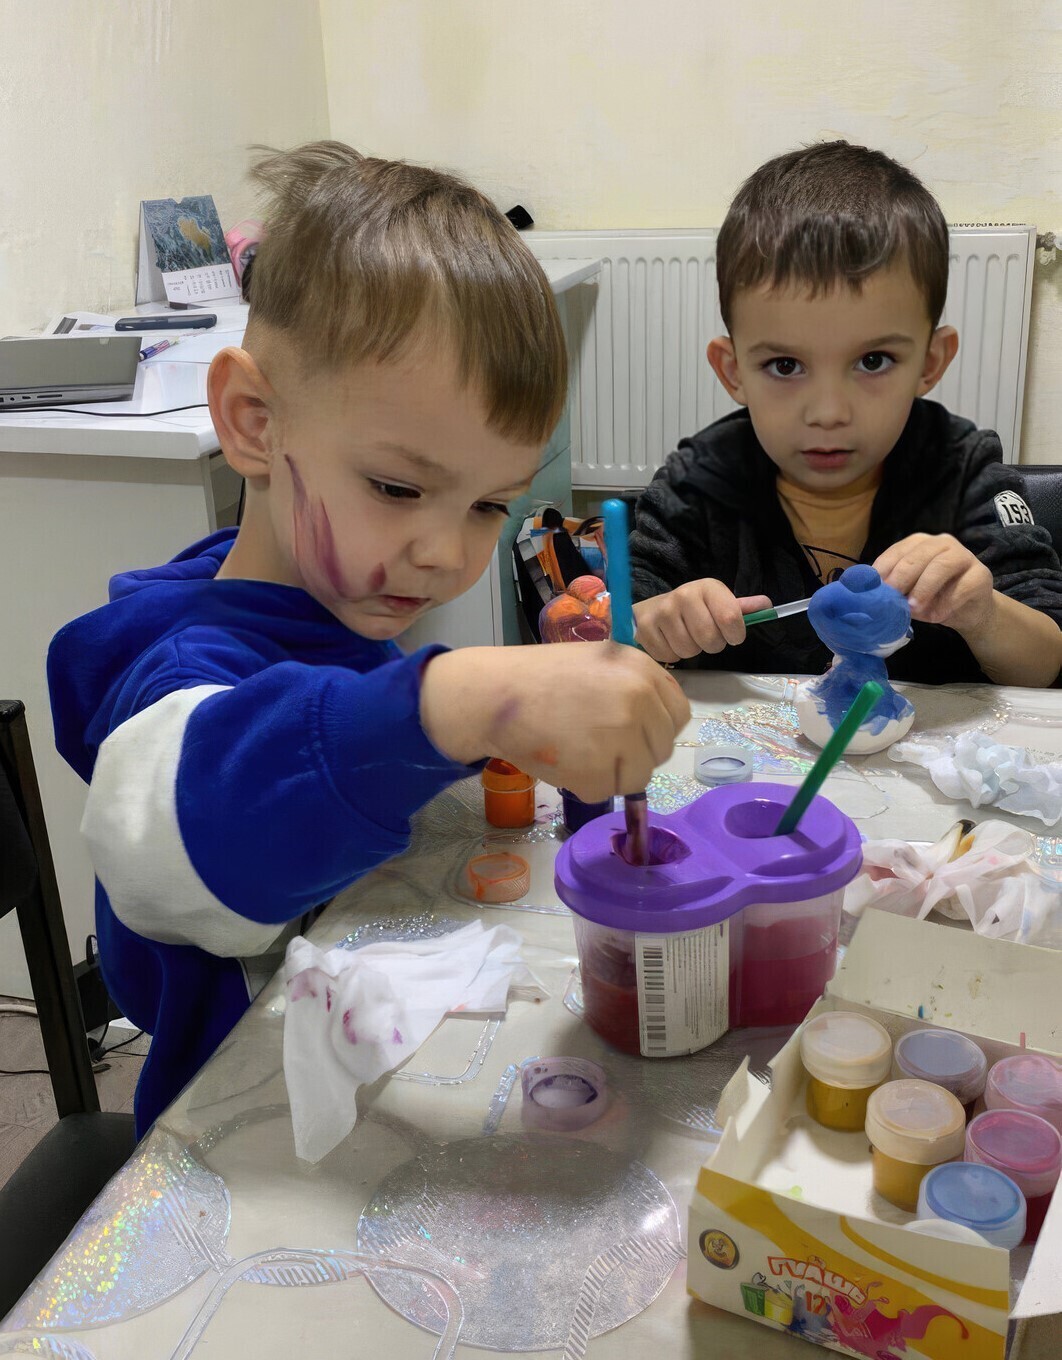 Two children playing with clay